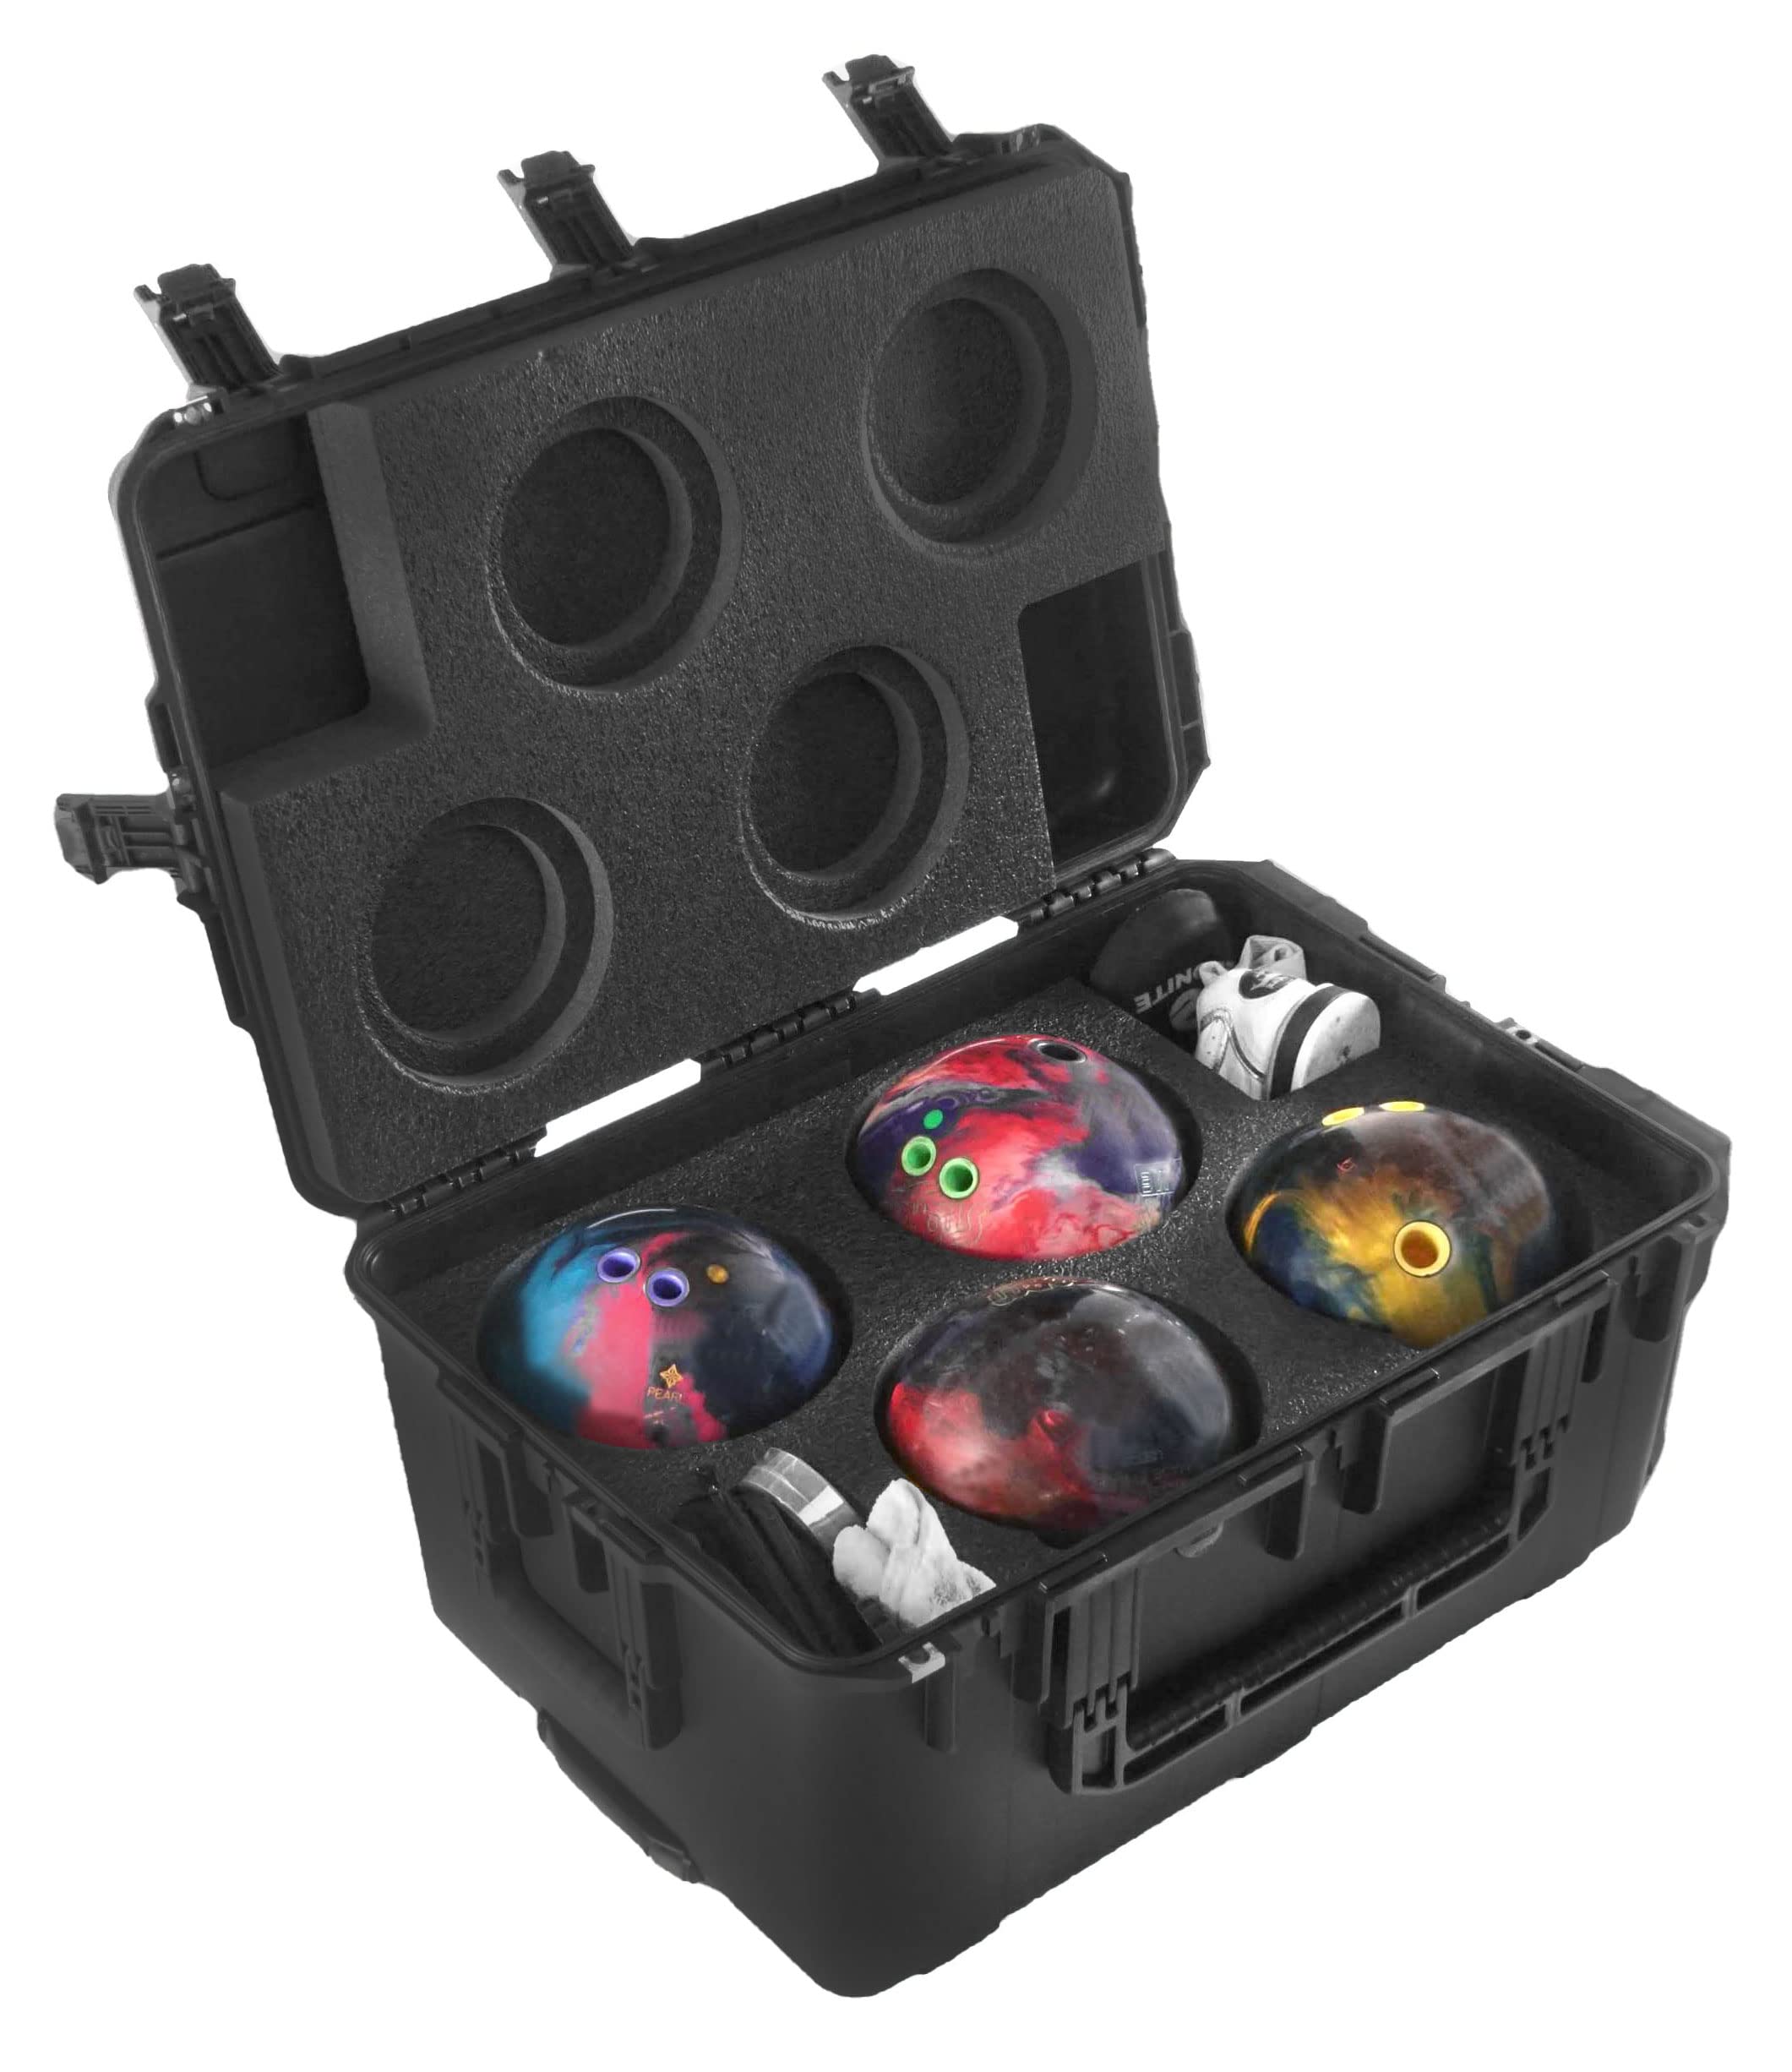 case club 4 Bowling Ball Heavy Duty Wheeled Travel case - Store, Protect, and Fly with up to 4 Bowling Balls, Shoes, and Accesso